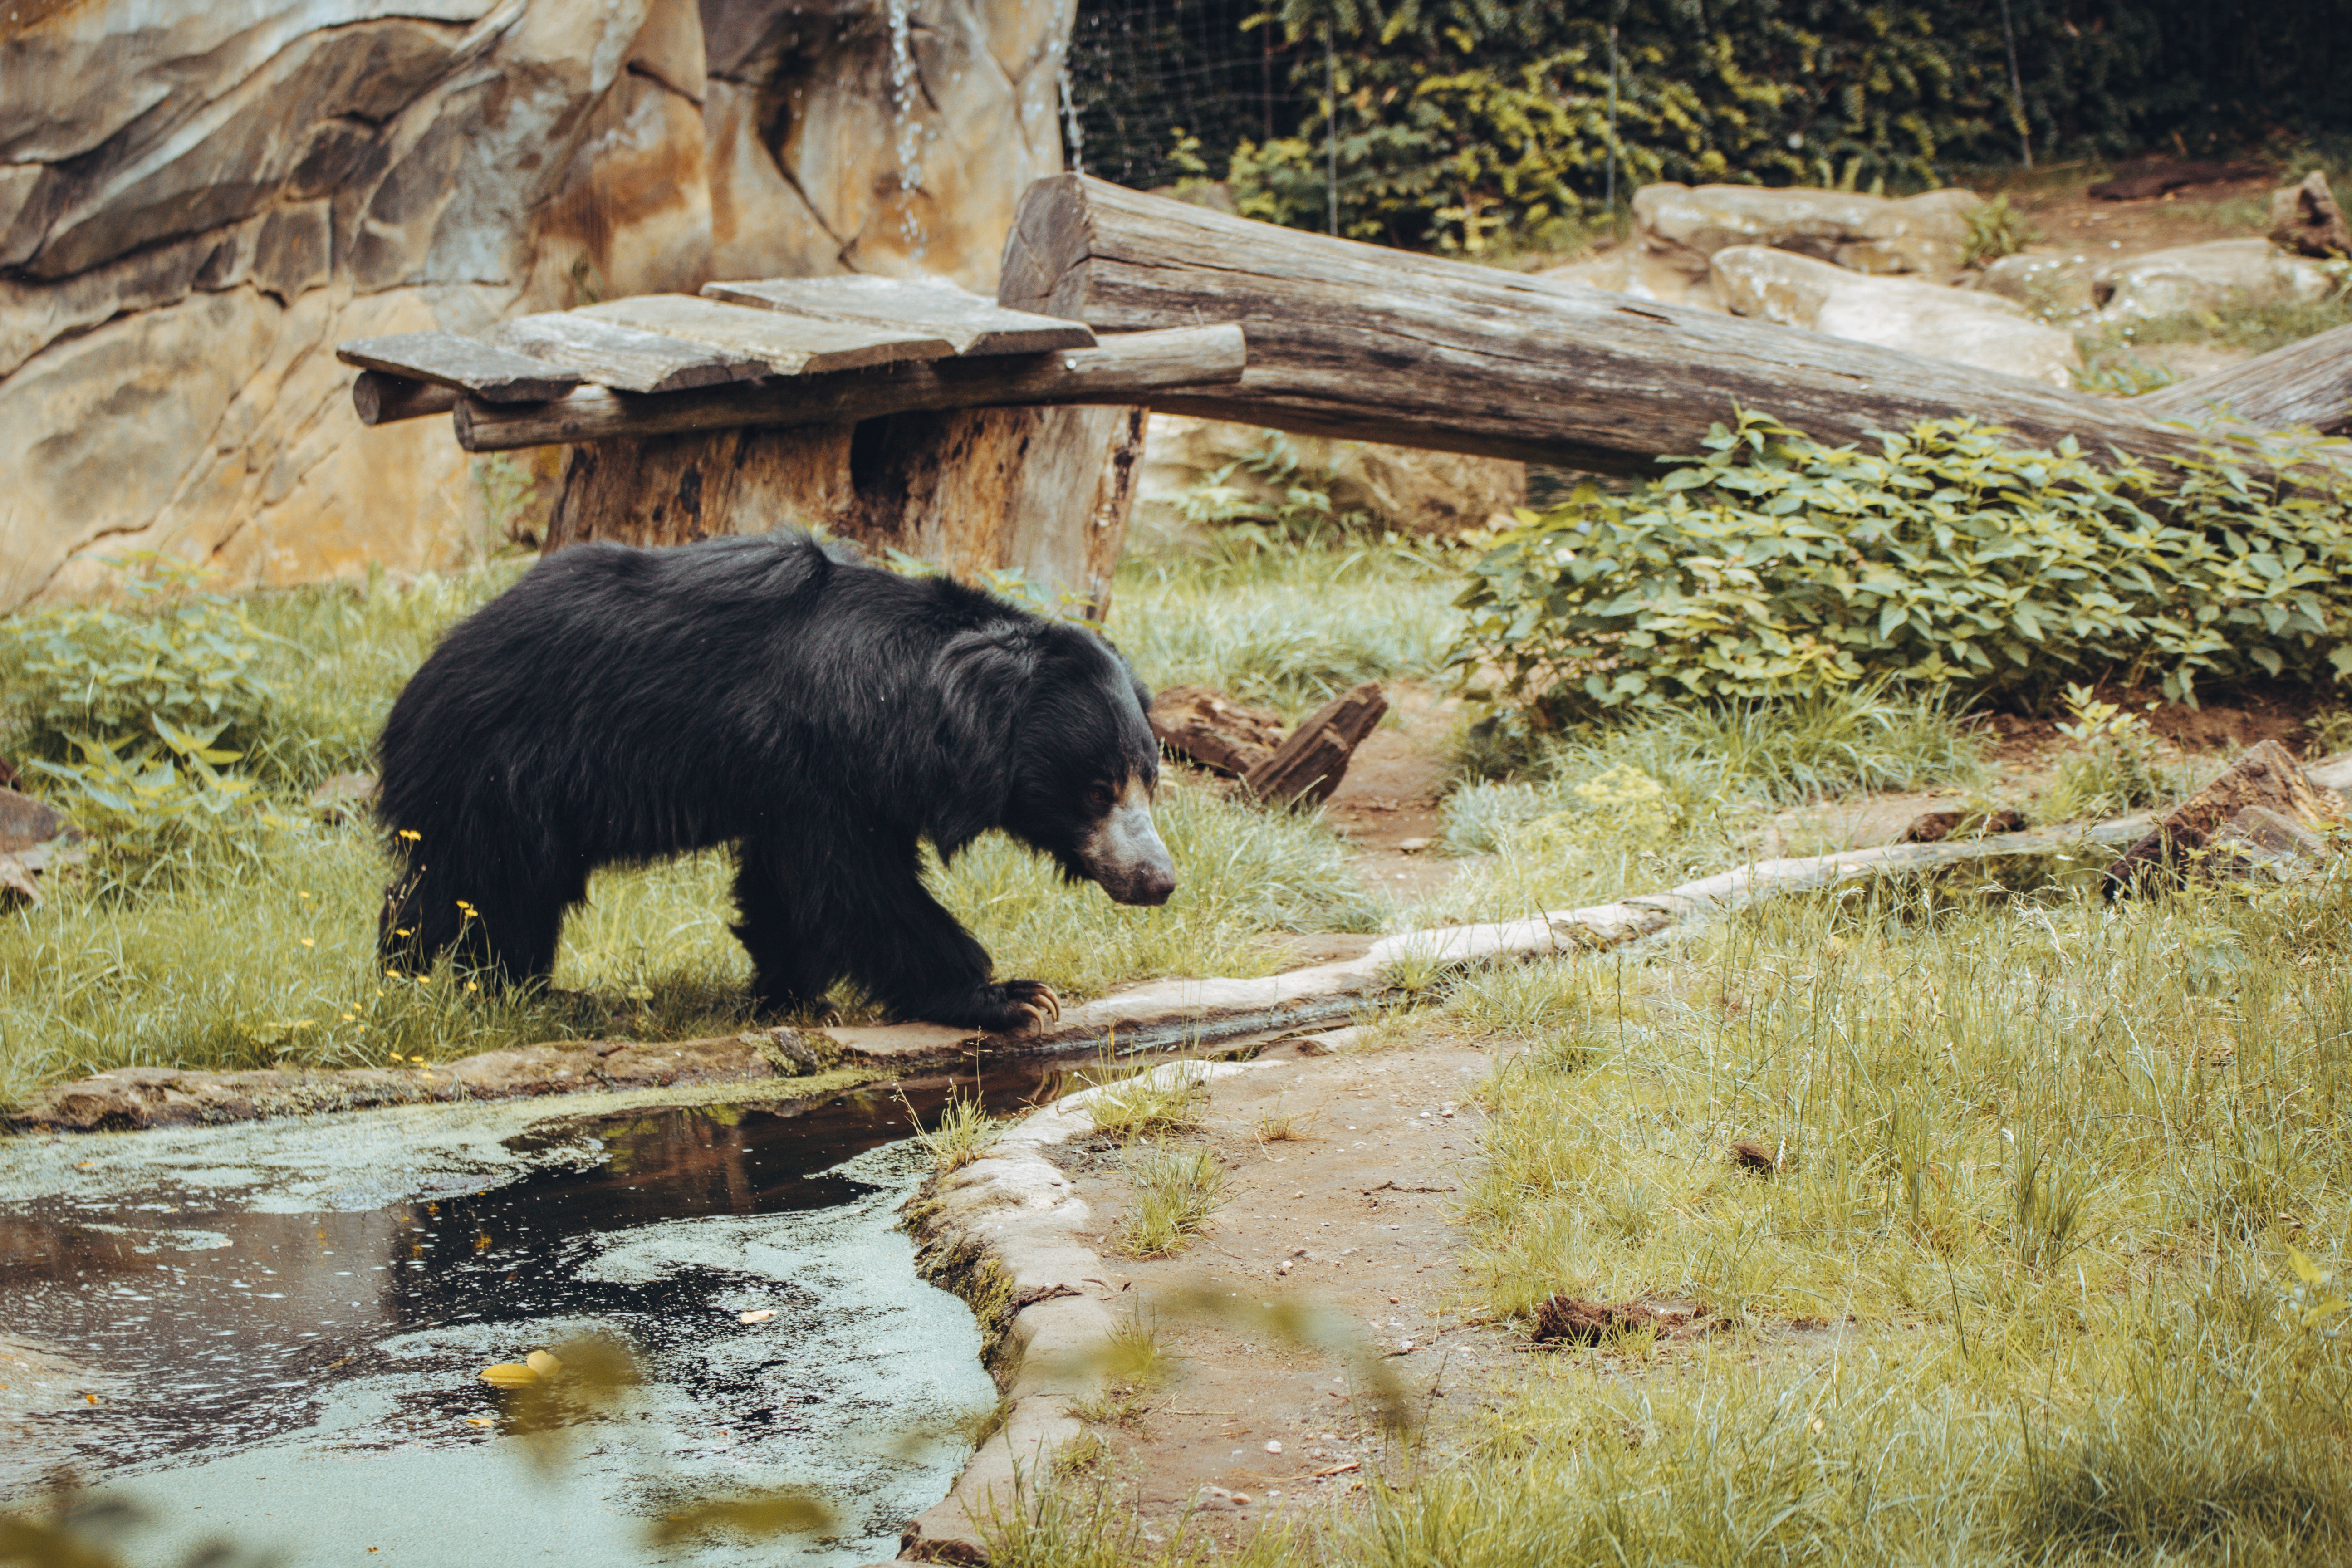 Sloth bears in Nepal struggle for safe ground